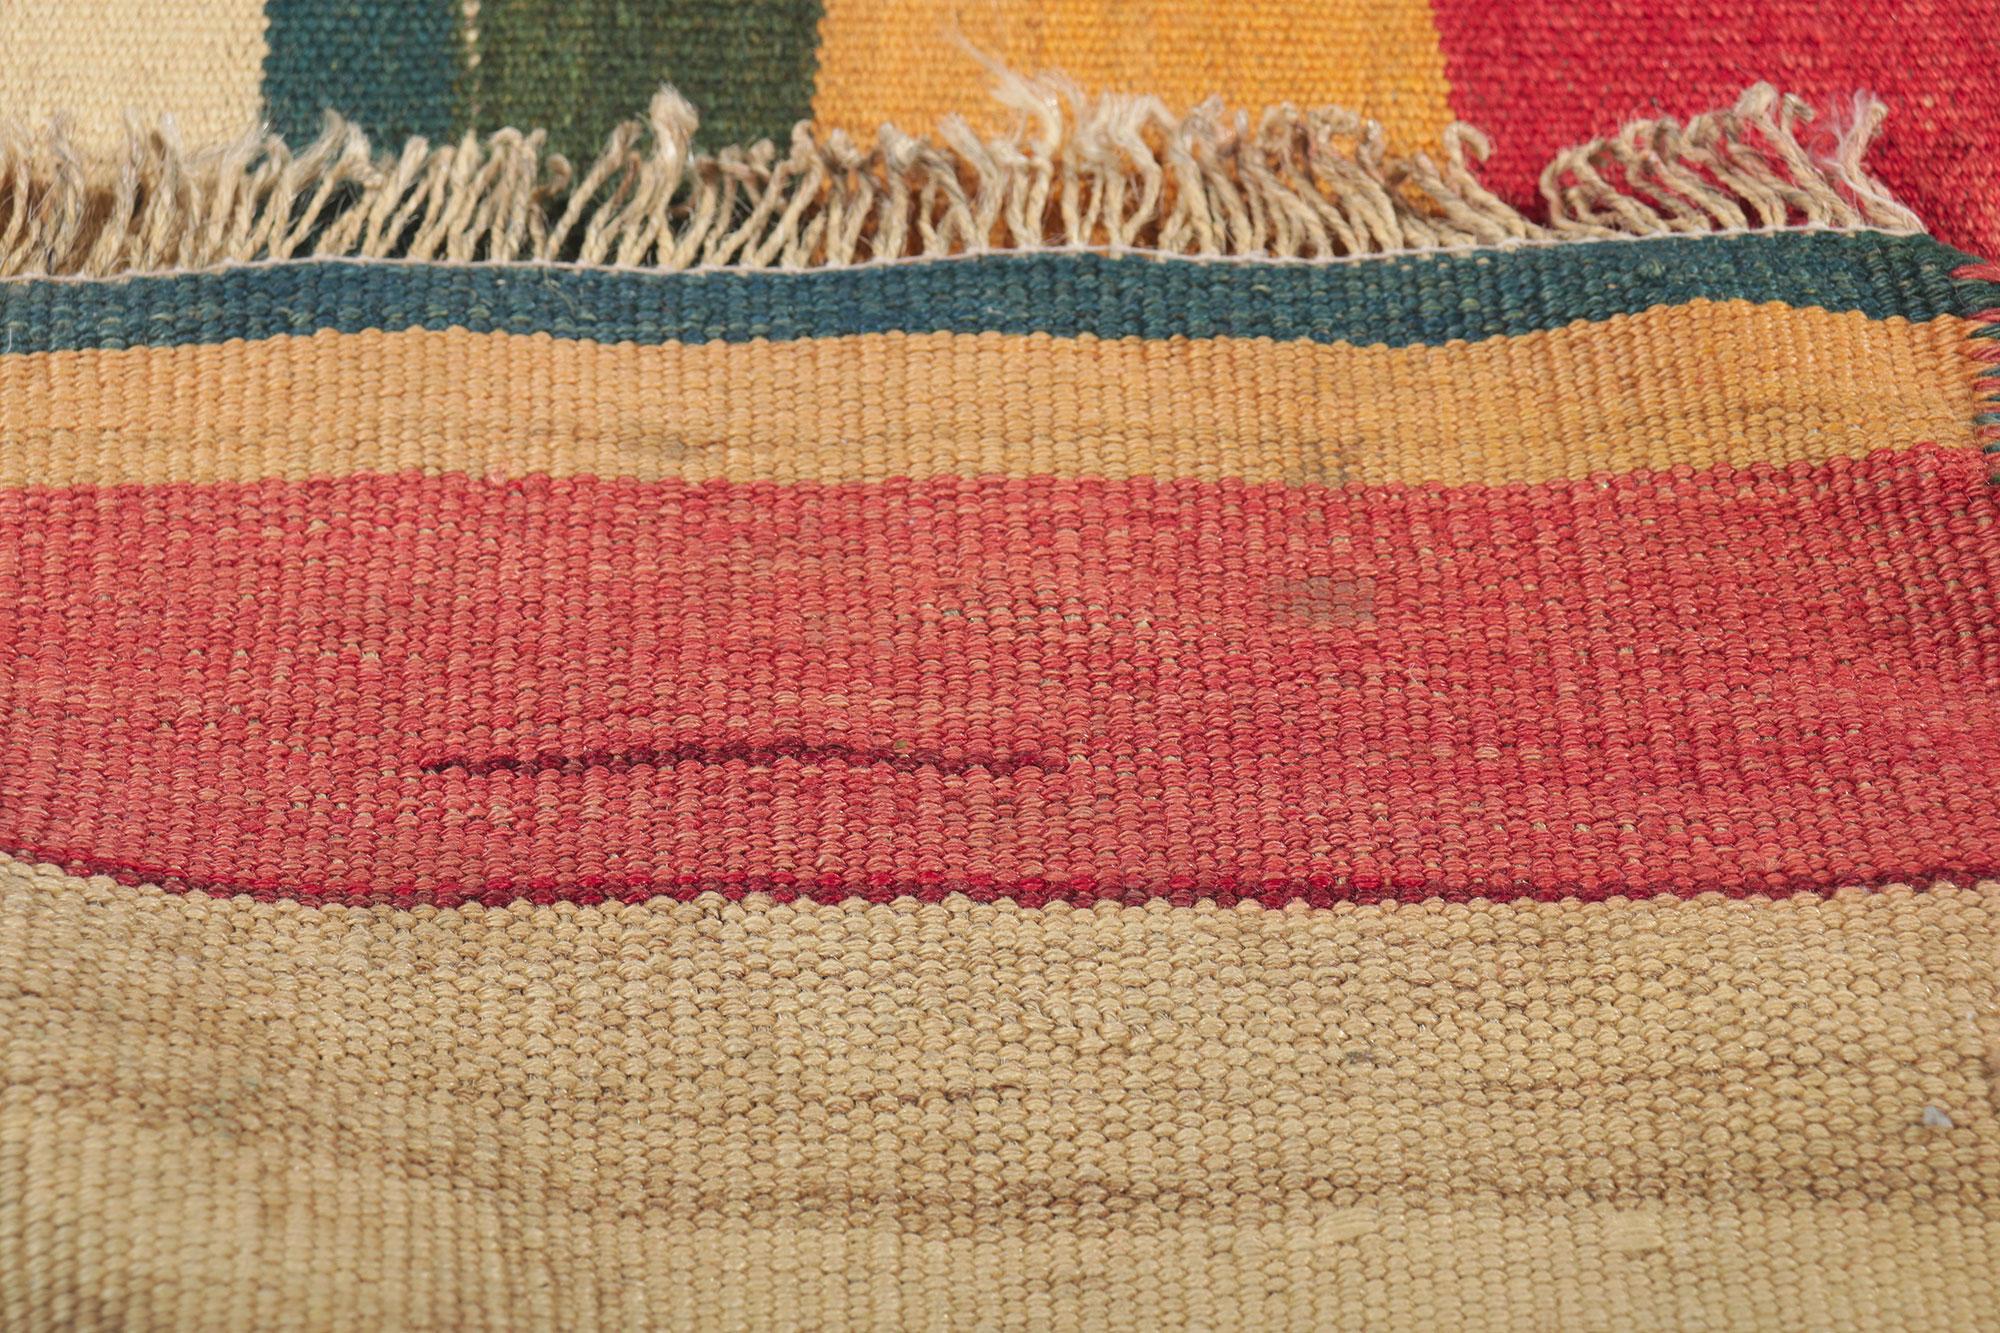 Vintage Turkish Kilim Rug with Colorful Stripes In Good Condition For Sale In Dallas, TX